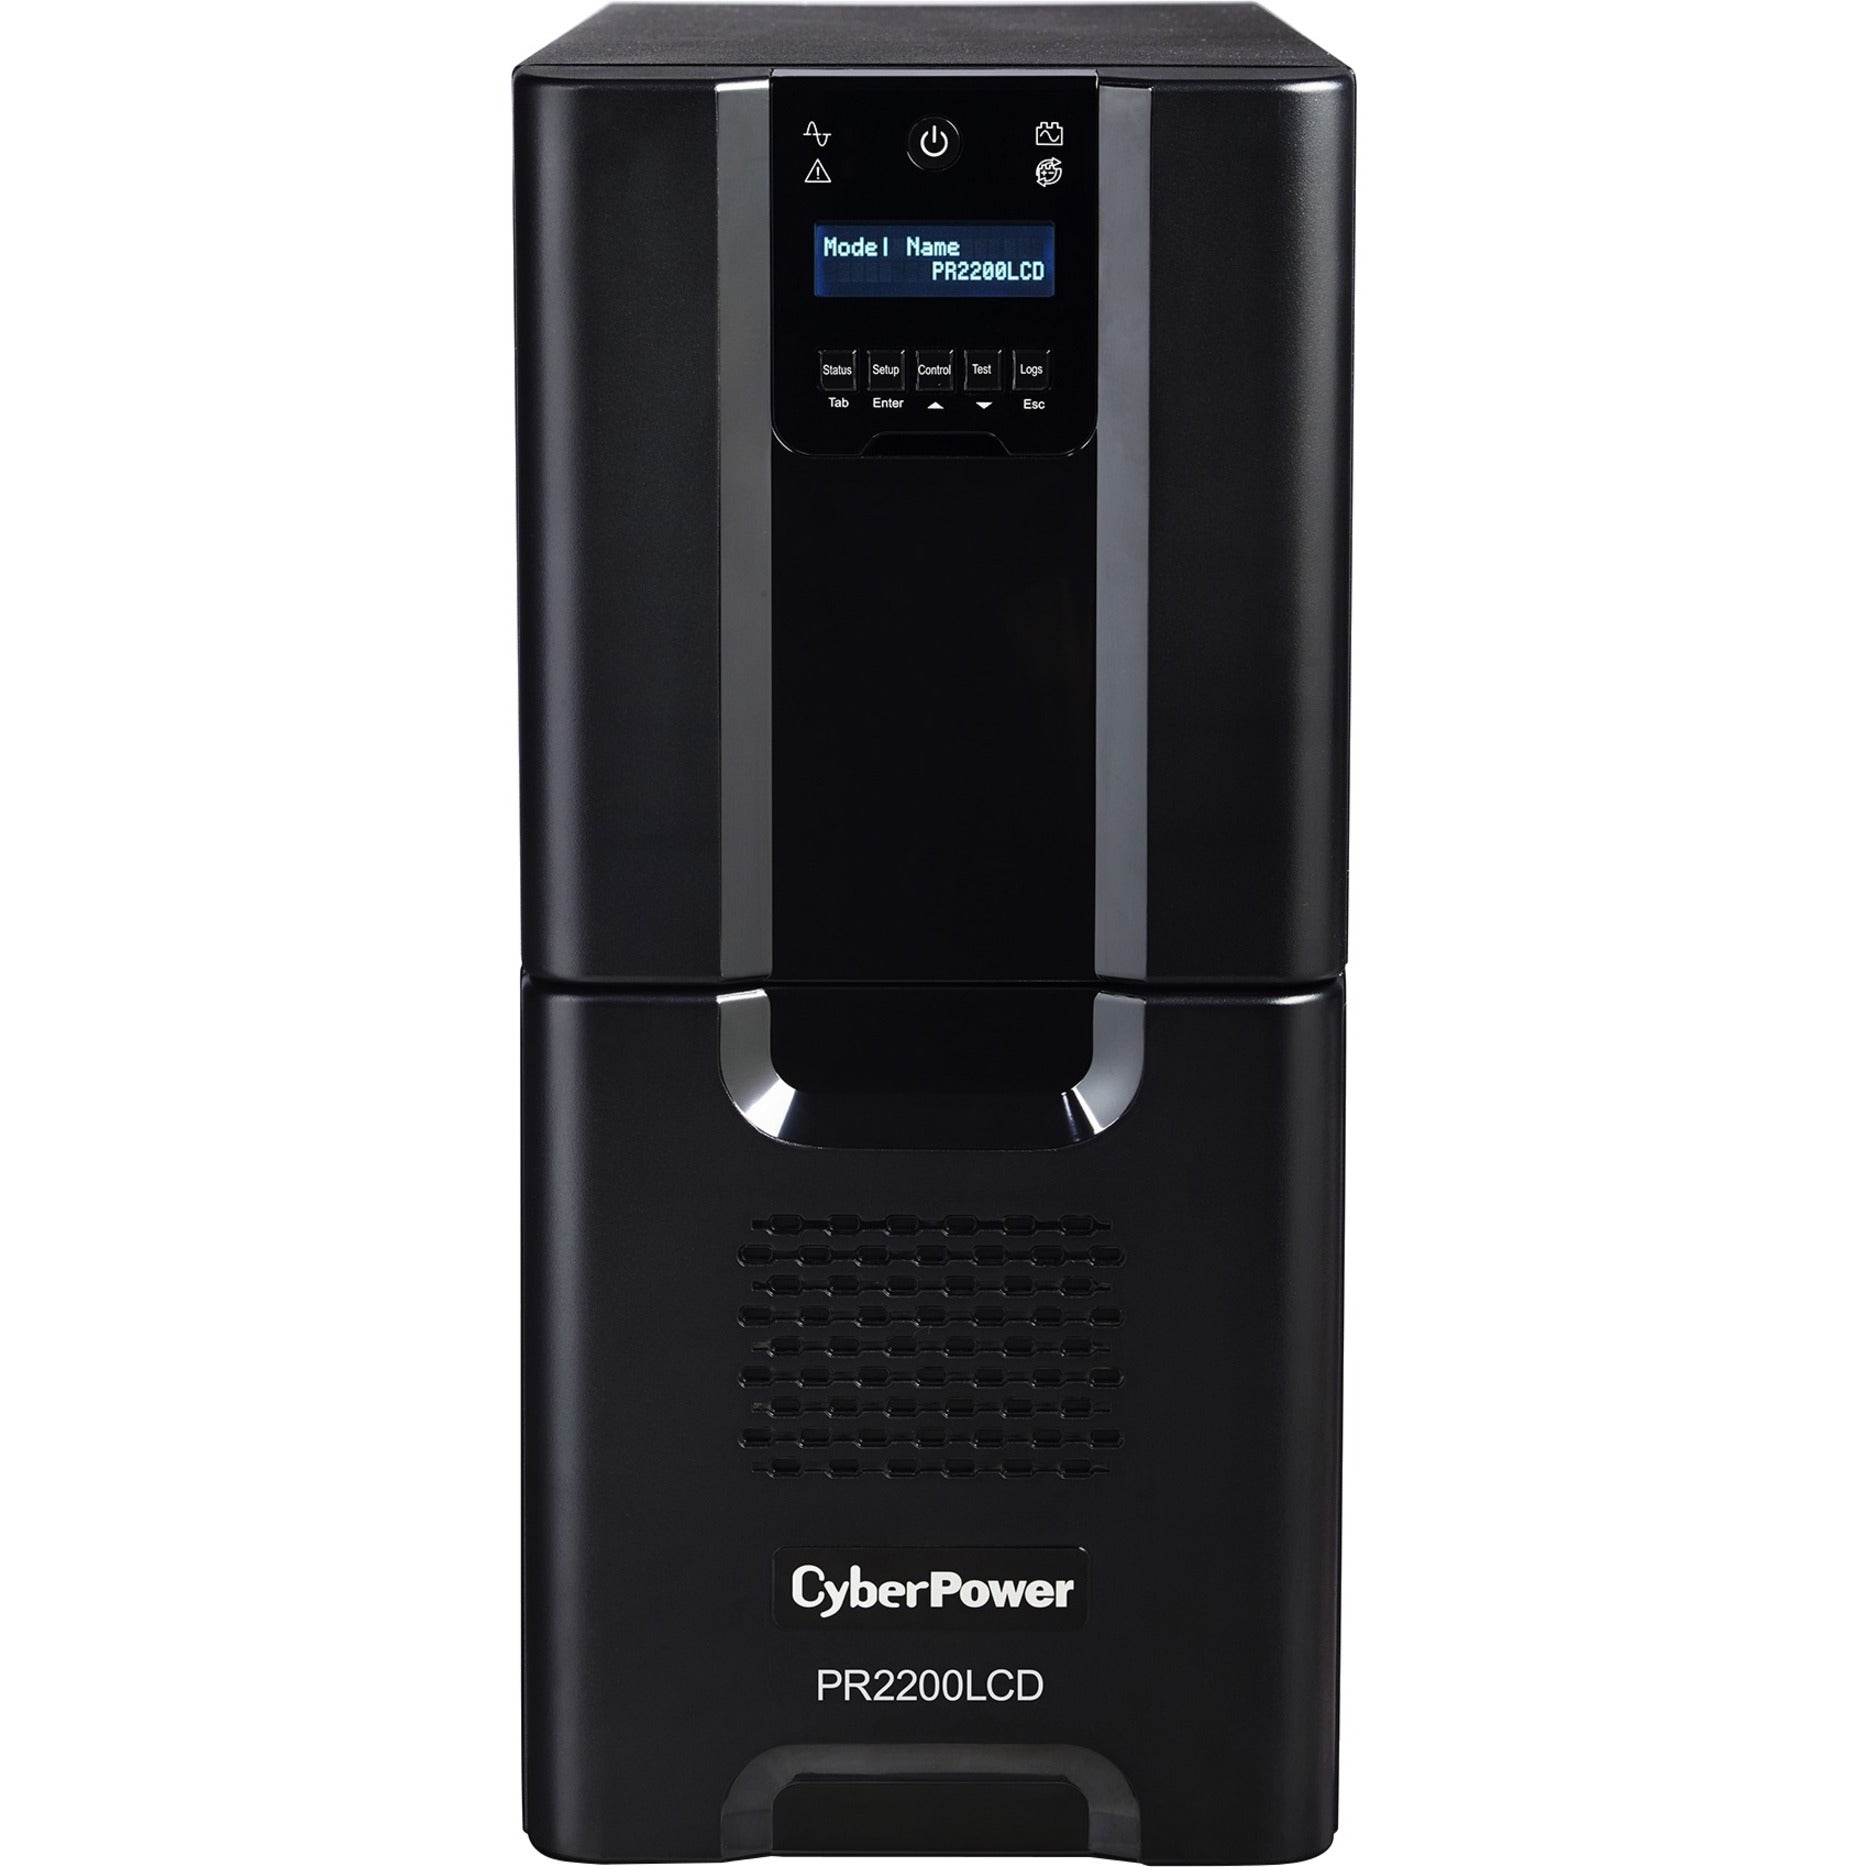 CyberPower PR2200LCD Smart App Sinewave UPS Systems, 2200VA Pure Sine Wave Tower LCD UPS